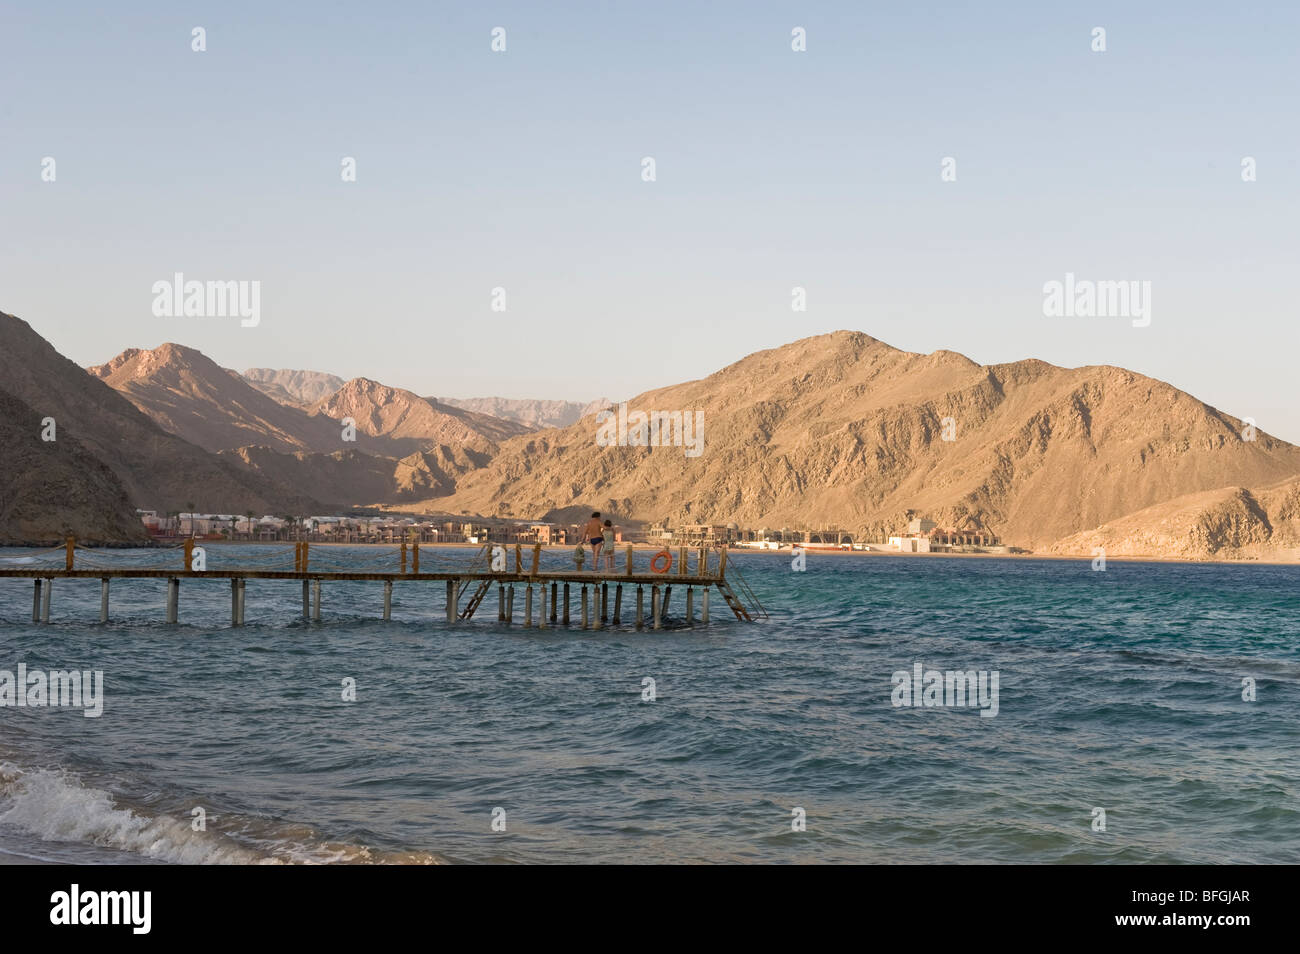 Sunset over Taba Heights, Taba, Sinai,Rea sea, Egypt, Africa, with calm blue waters in the foreground and diving jetty. Stock Photo